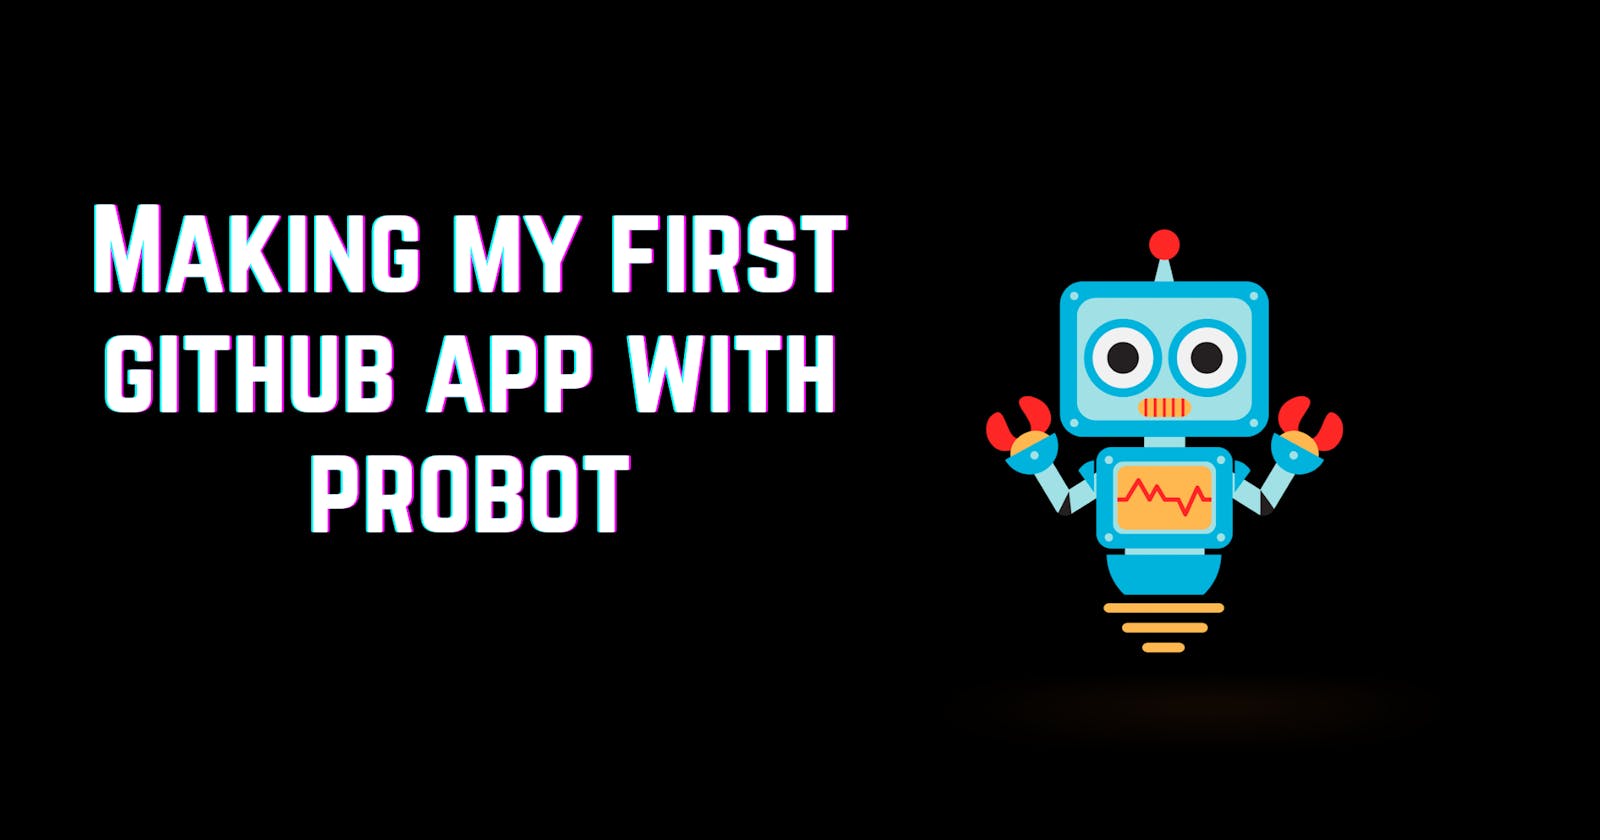 Developing My First GitHub App with Probot